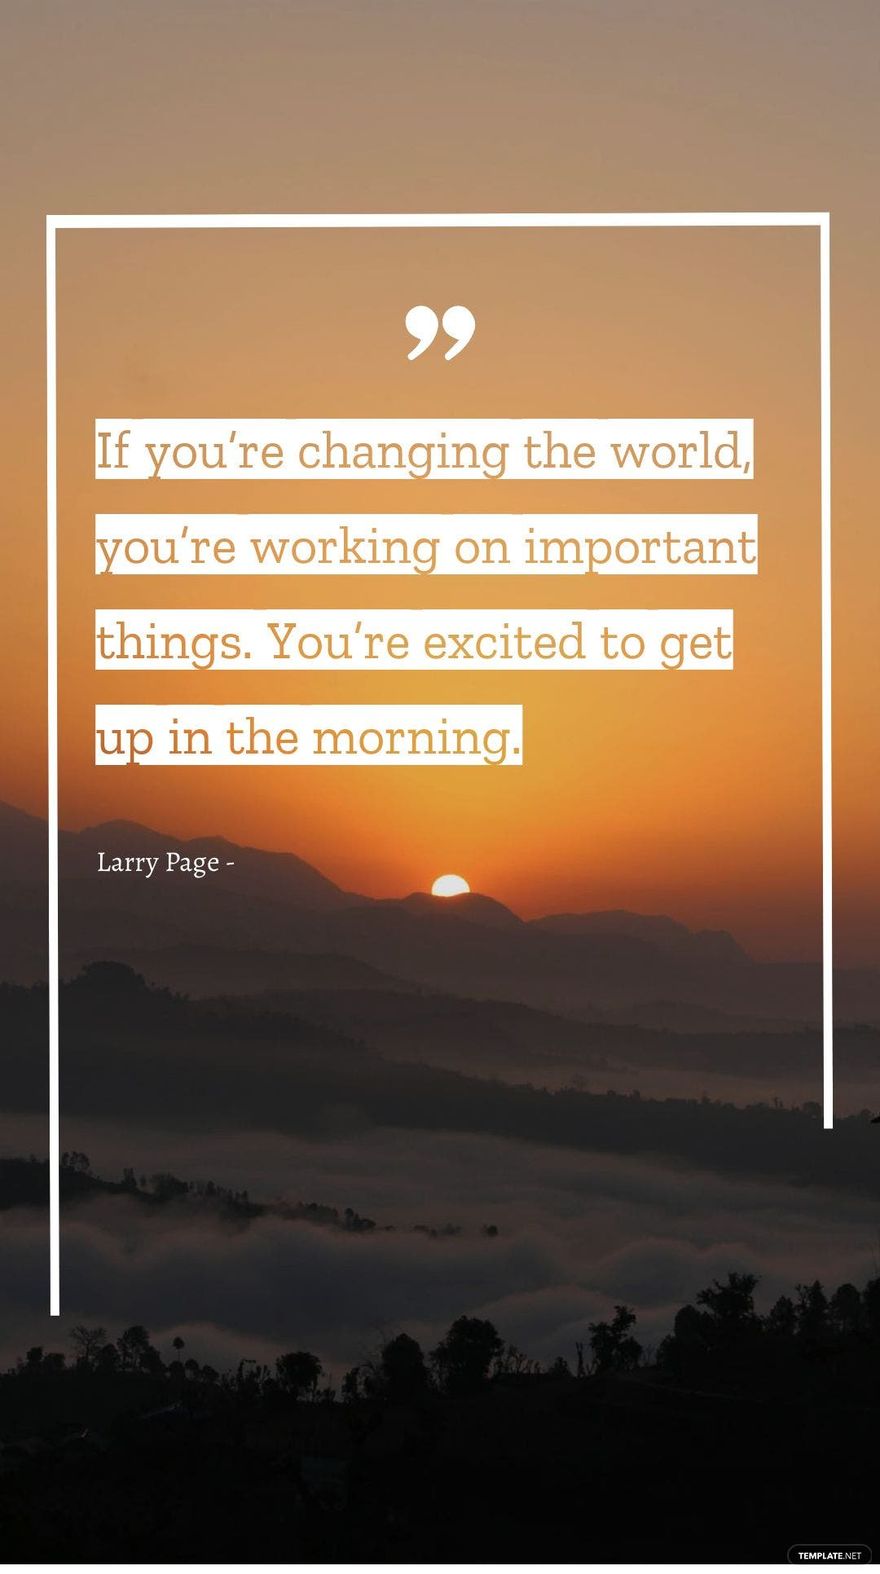 Larry Page - If you’re changing the world, you’re working on important things. You’re excited to get up in the morning.